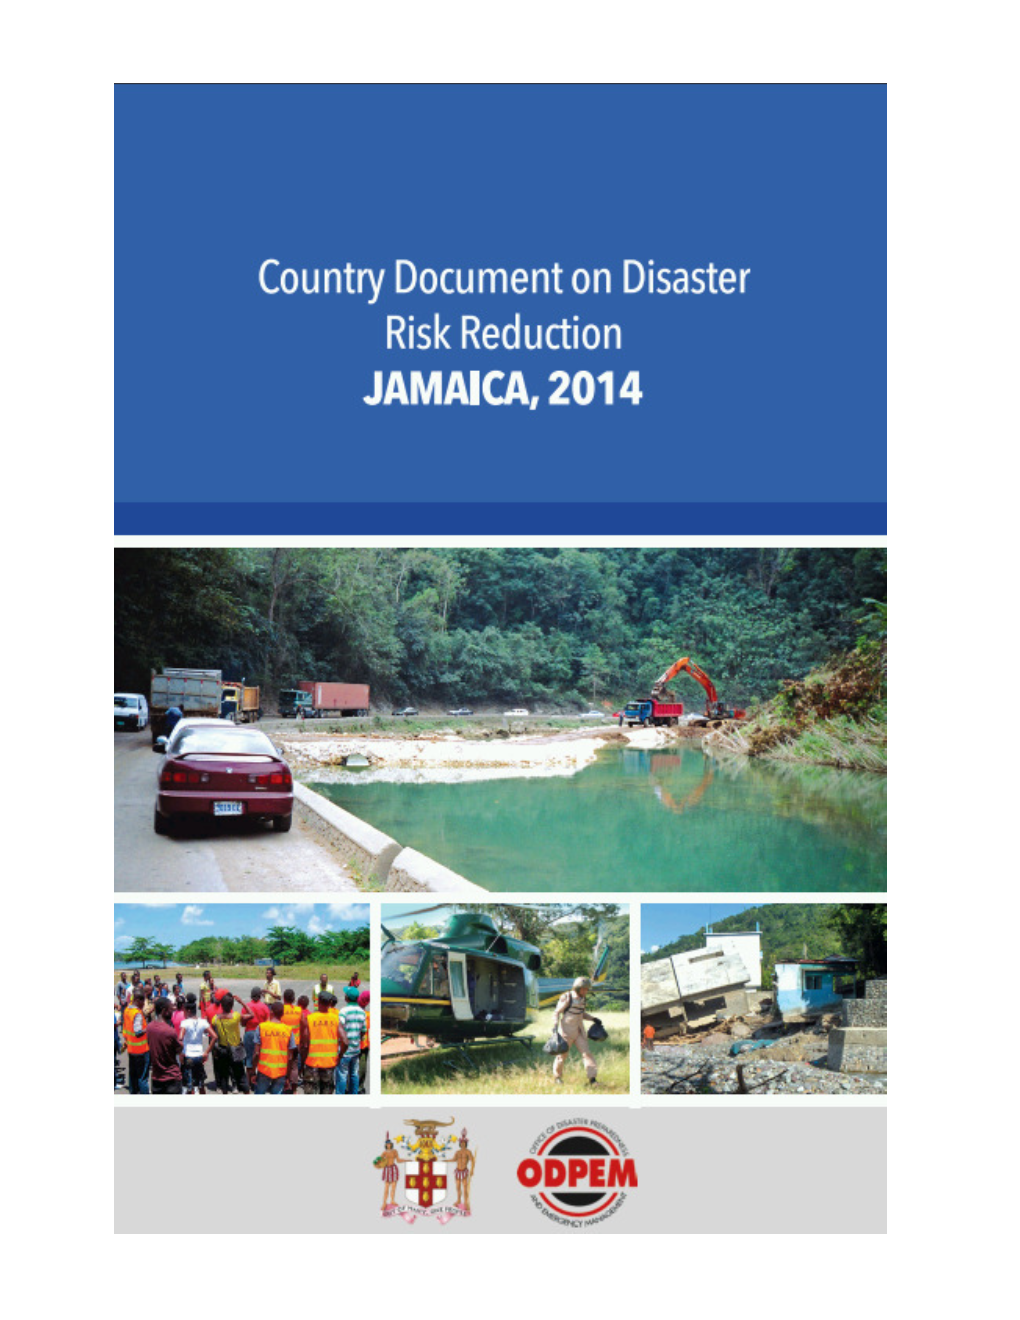 Jamaica Country Document on Disaster Risk Reduction, 2014